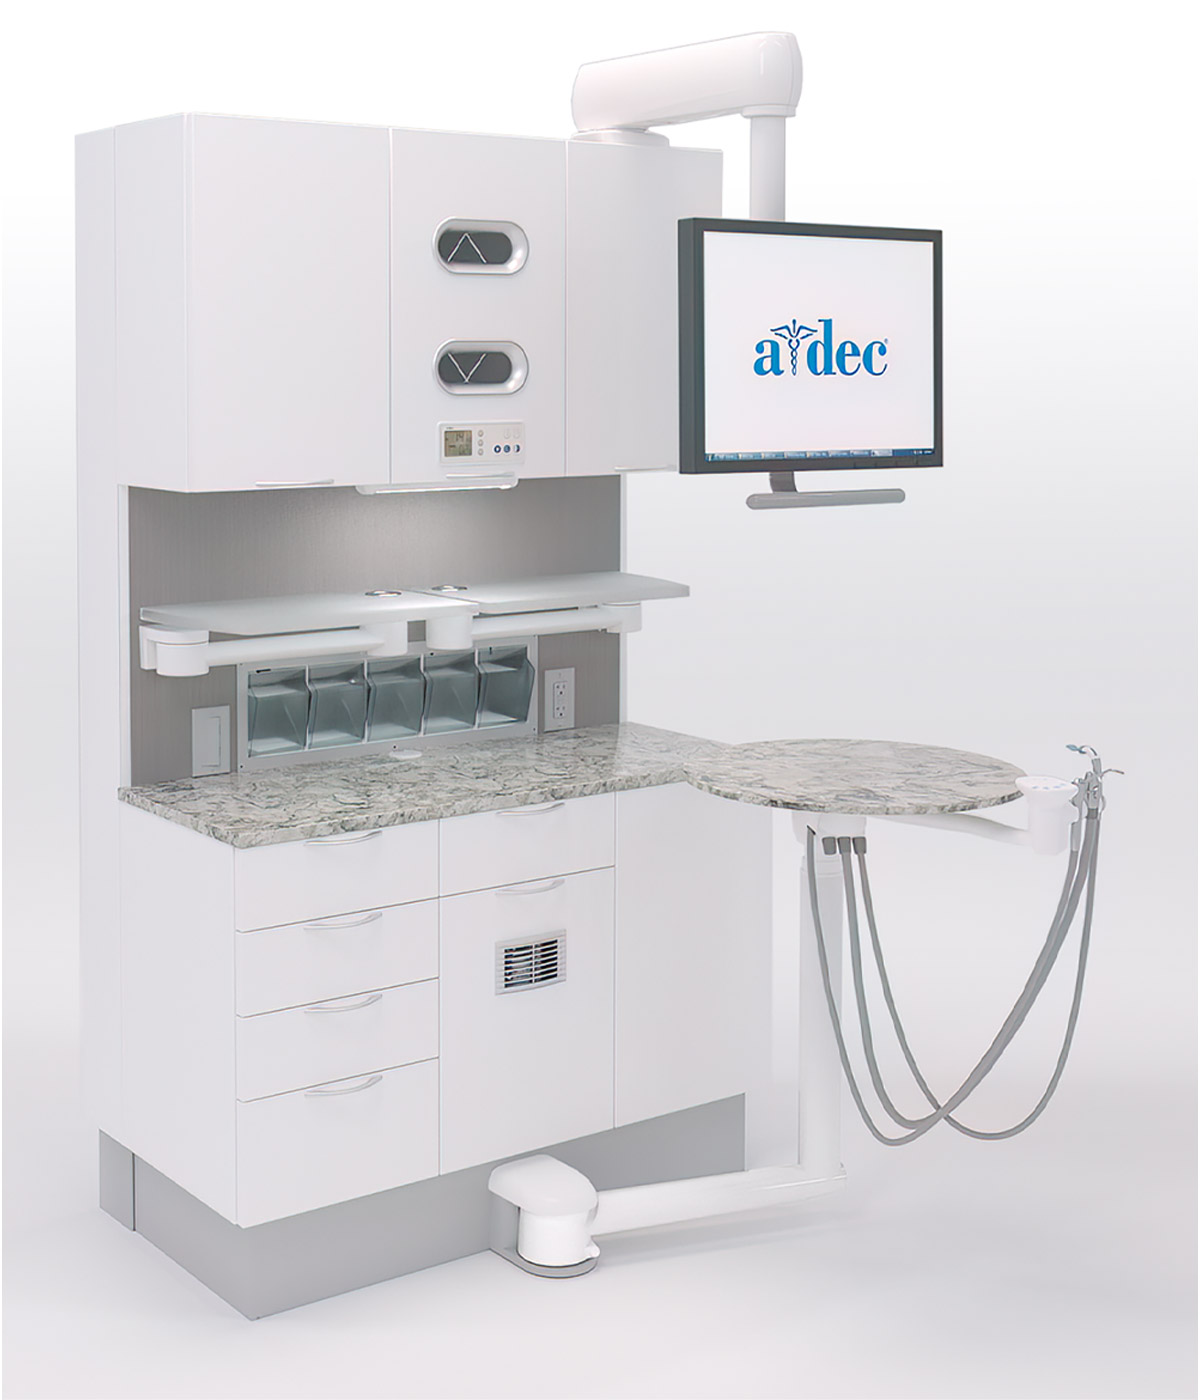 A-dec Inspire 391 dental cabinet with 12 o'clock delivery system